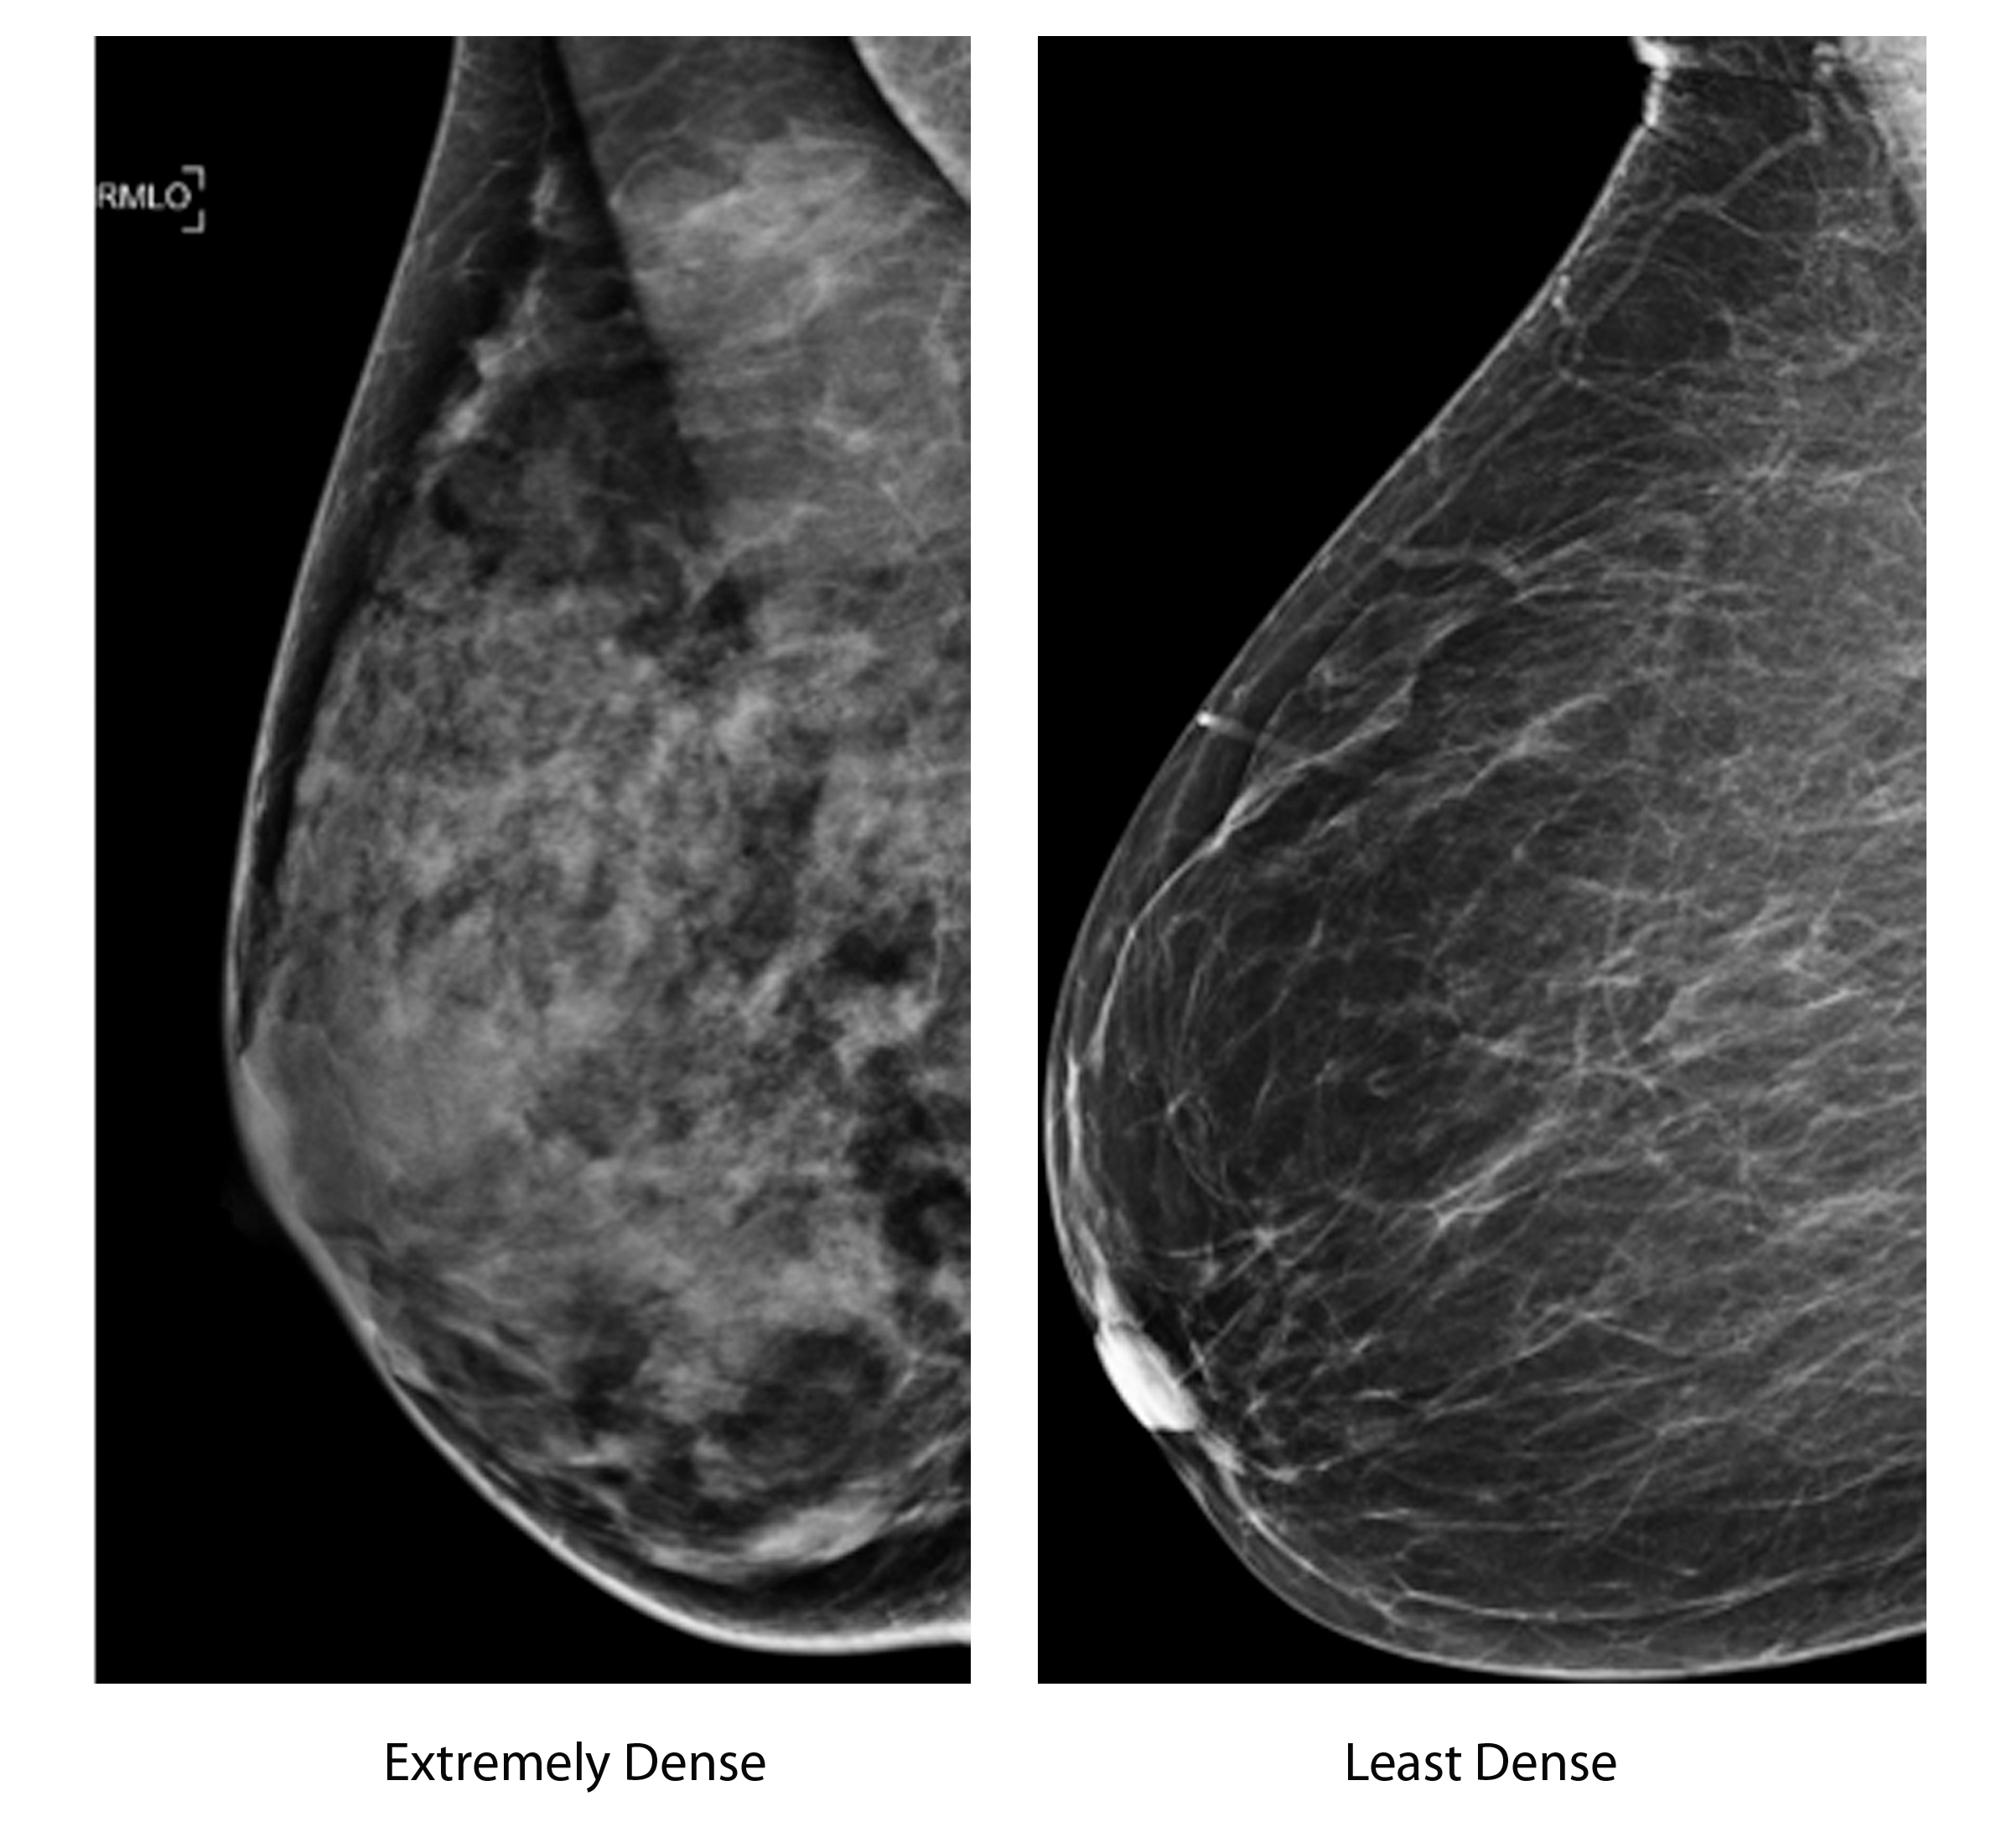 Study shows many women don’t know dangers of dense breast tissue